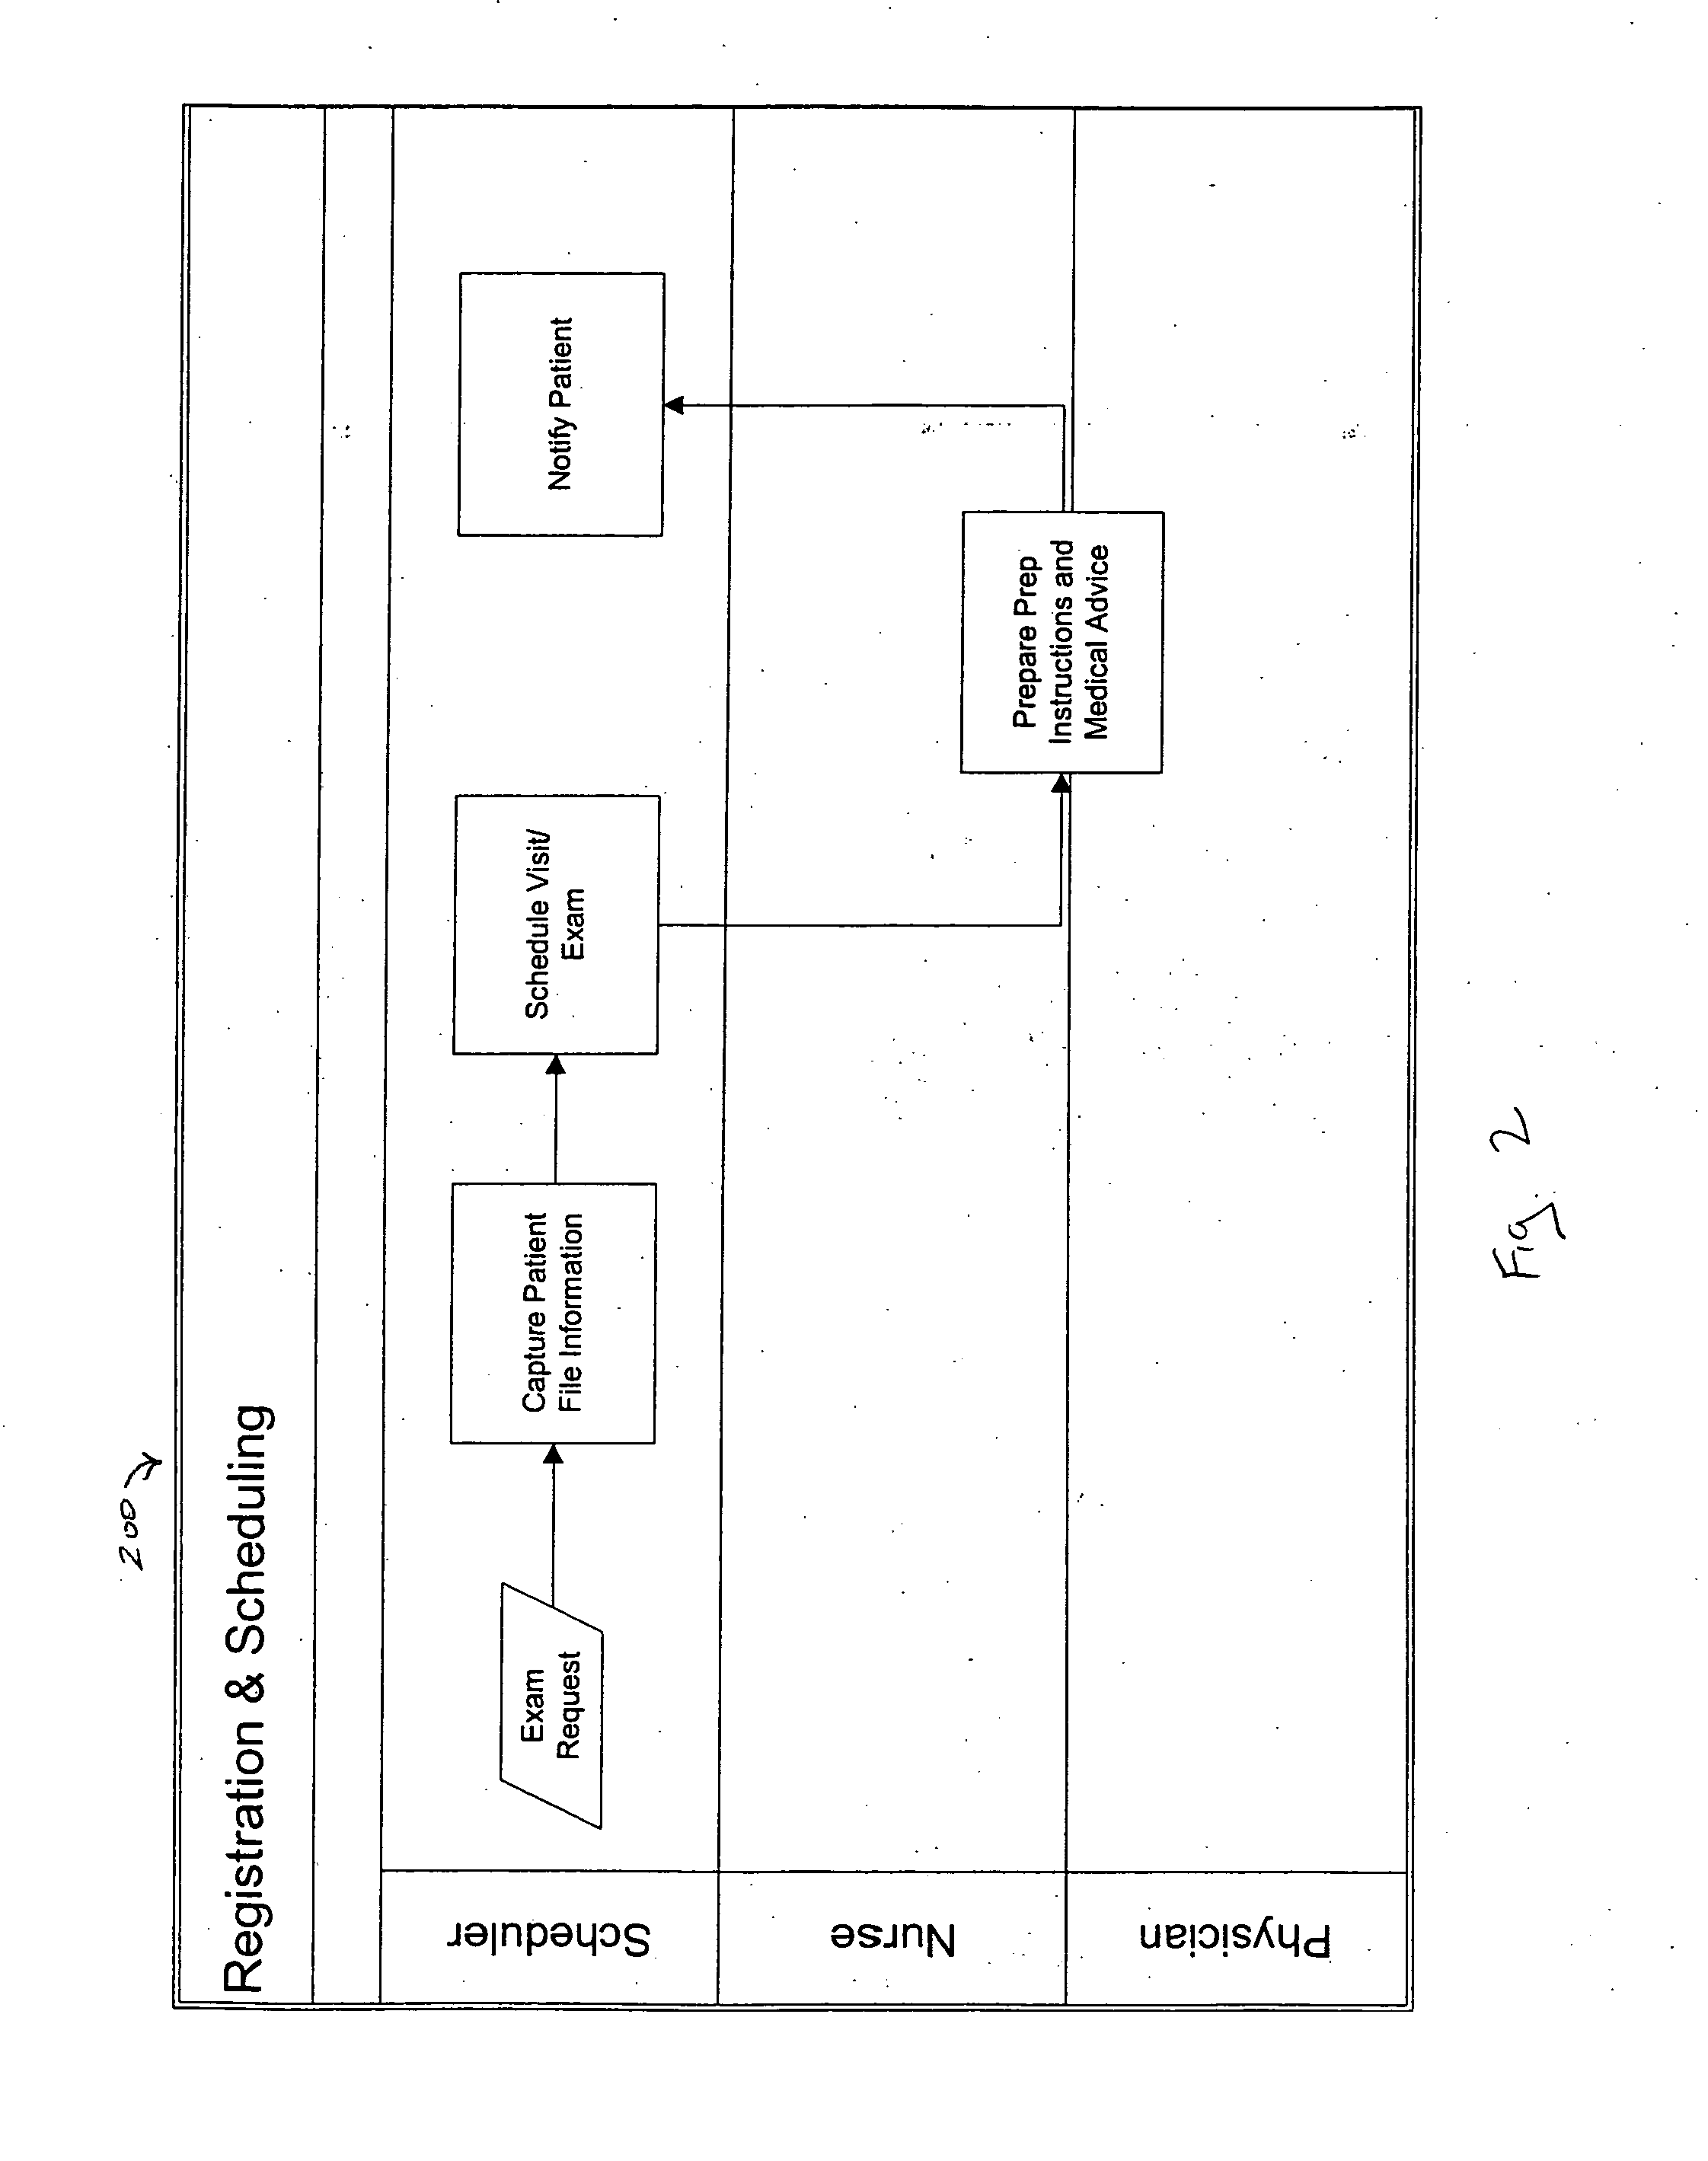 System and method for managing an endoscopic lab